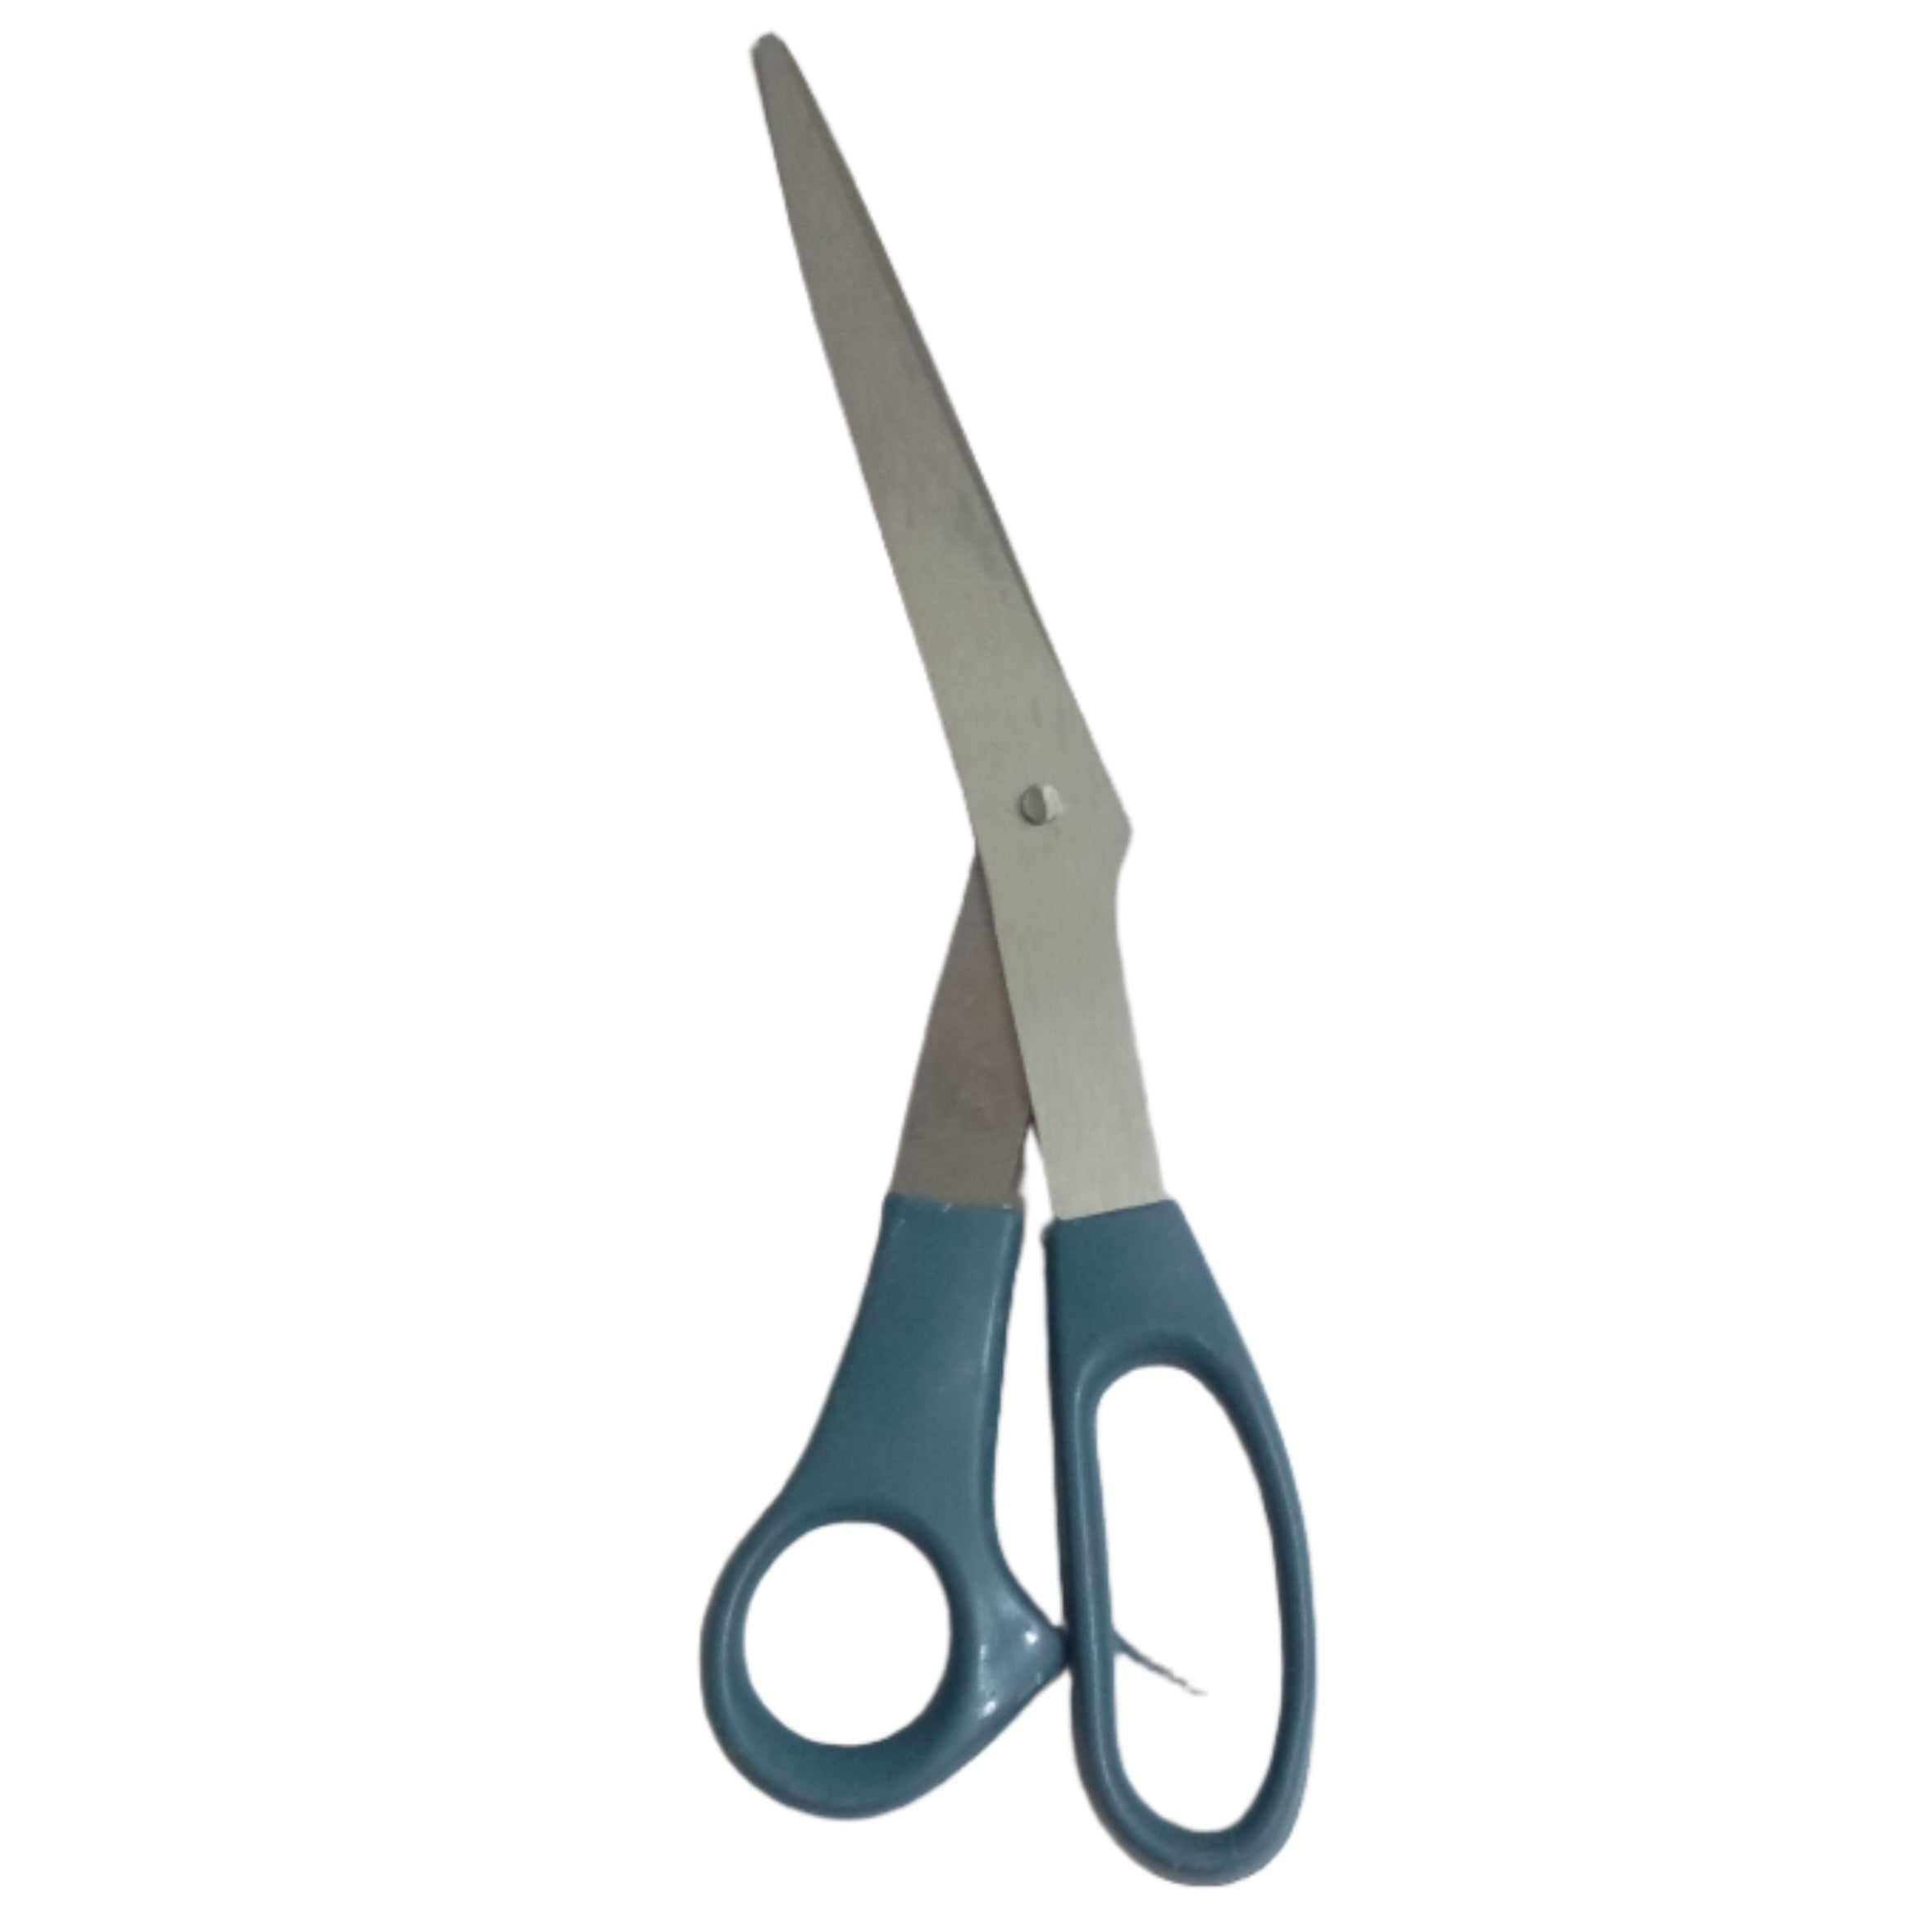 Stainless Steel Scissors Best Quality, Blue | OVY14b